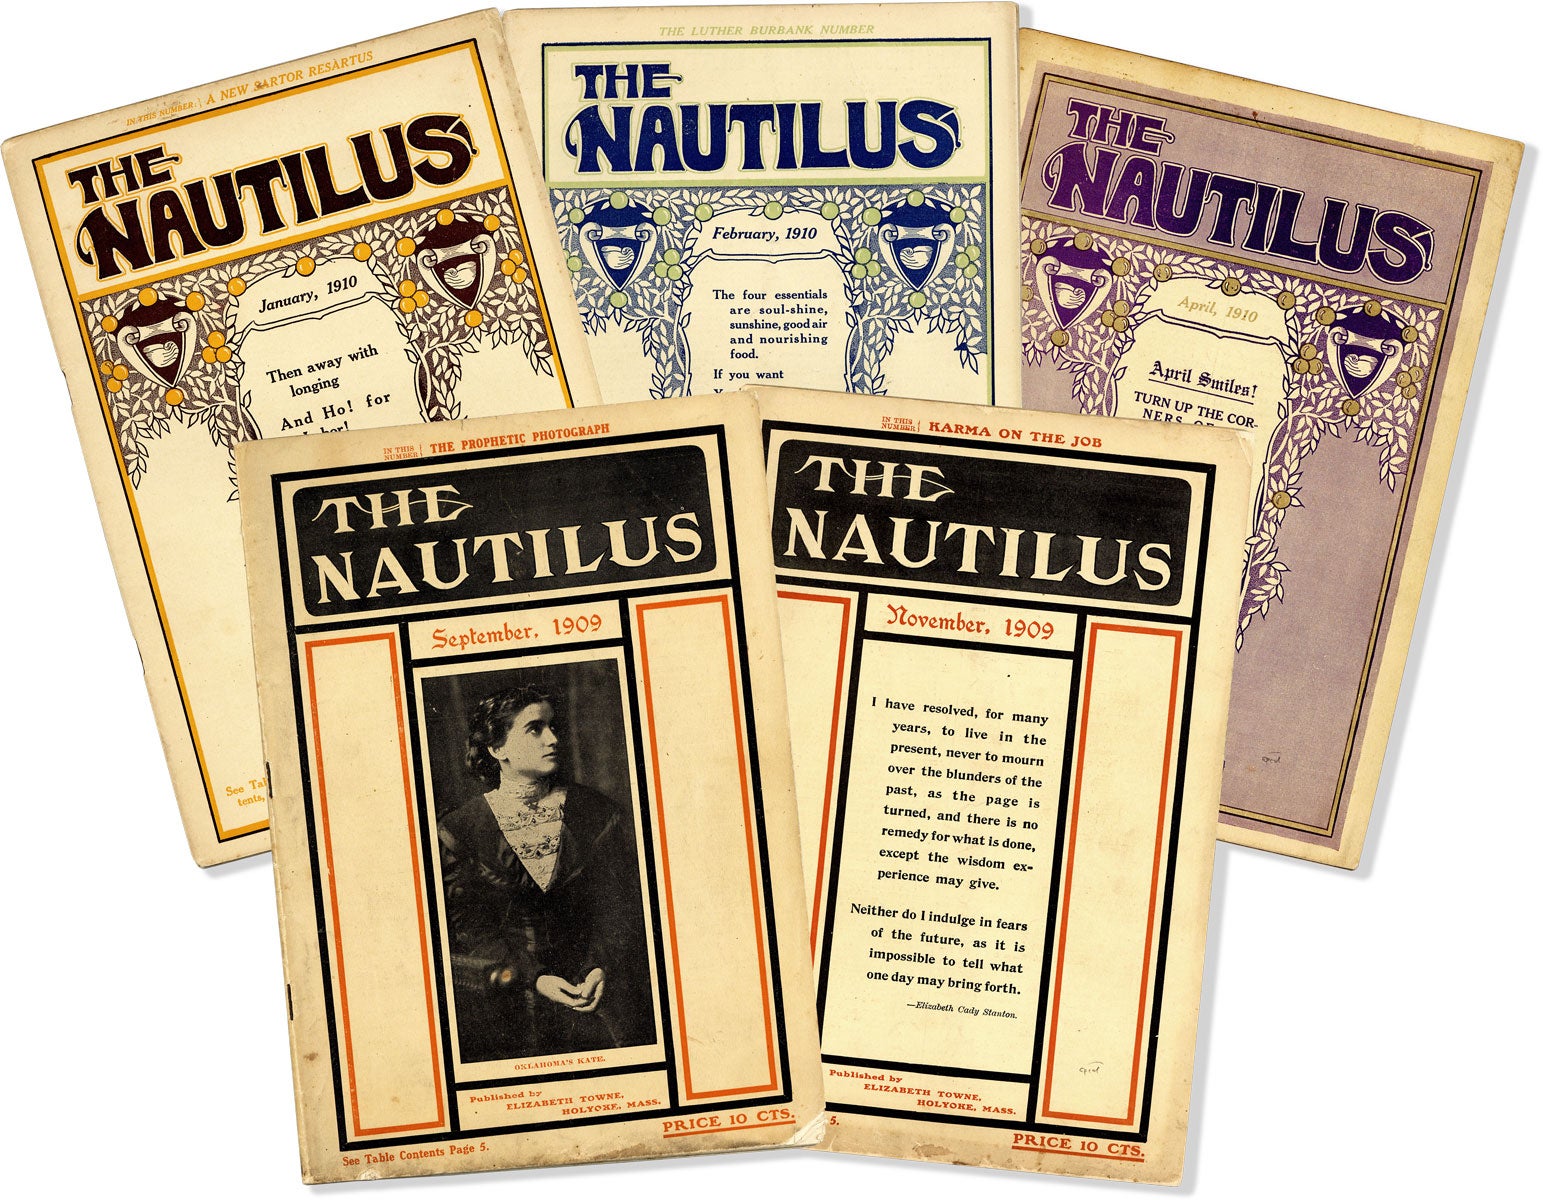 [Item #64134] "The City Shadow" [in] The Nautilus. Magazine of New Thought. Five contiguous issues, 1909-1910. NEW THOUGHT, Sinclair LEWIS.